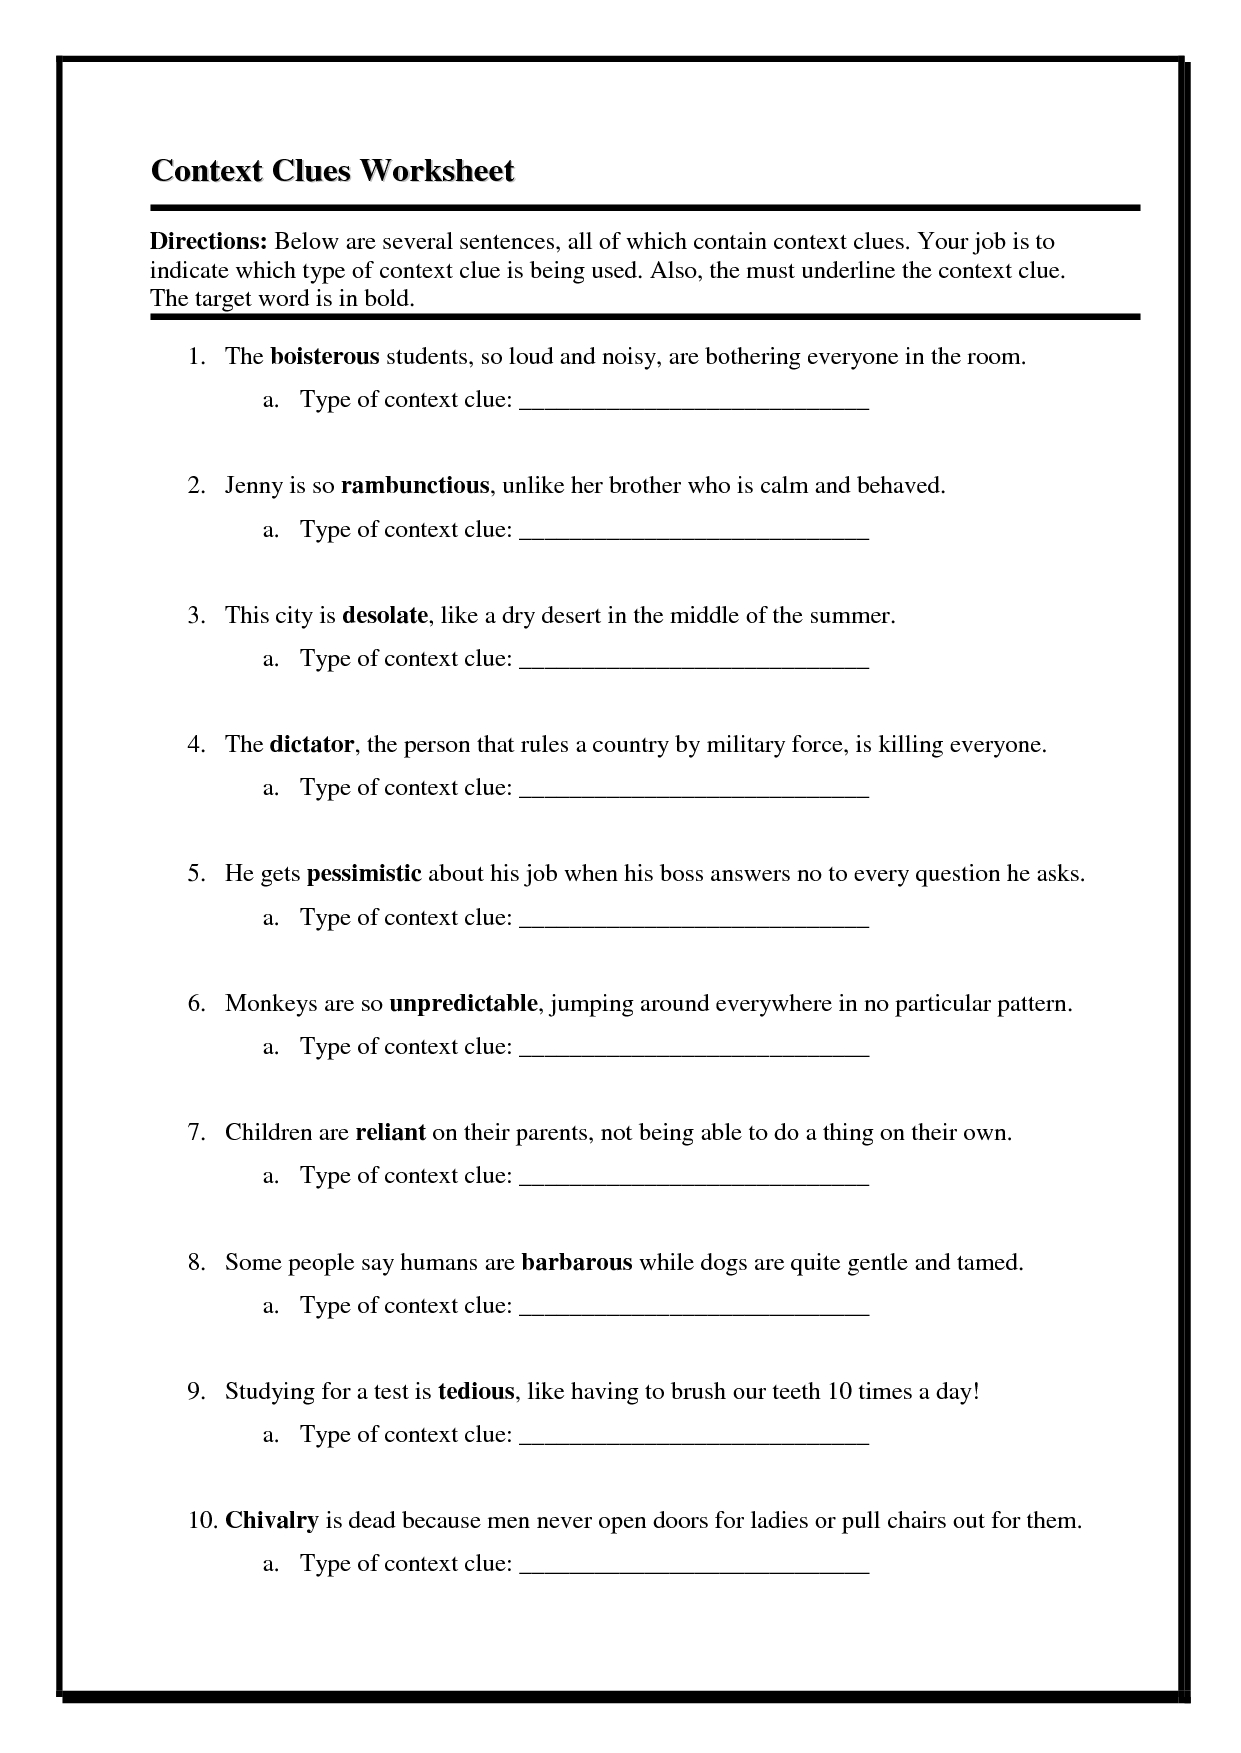 Reading Worksheets For 4Th Grade |  4Th Grade Reading - Free Printable 4Th Grade Reading Worksheets